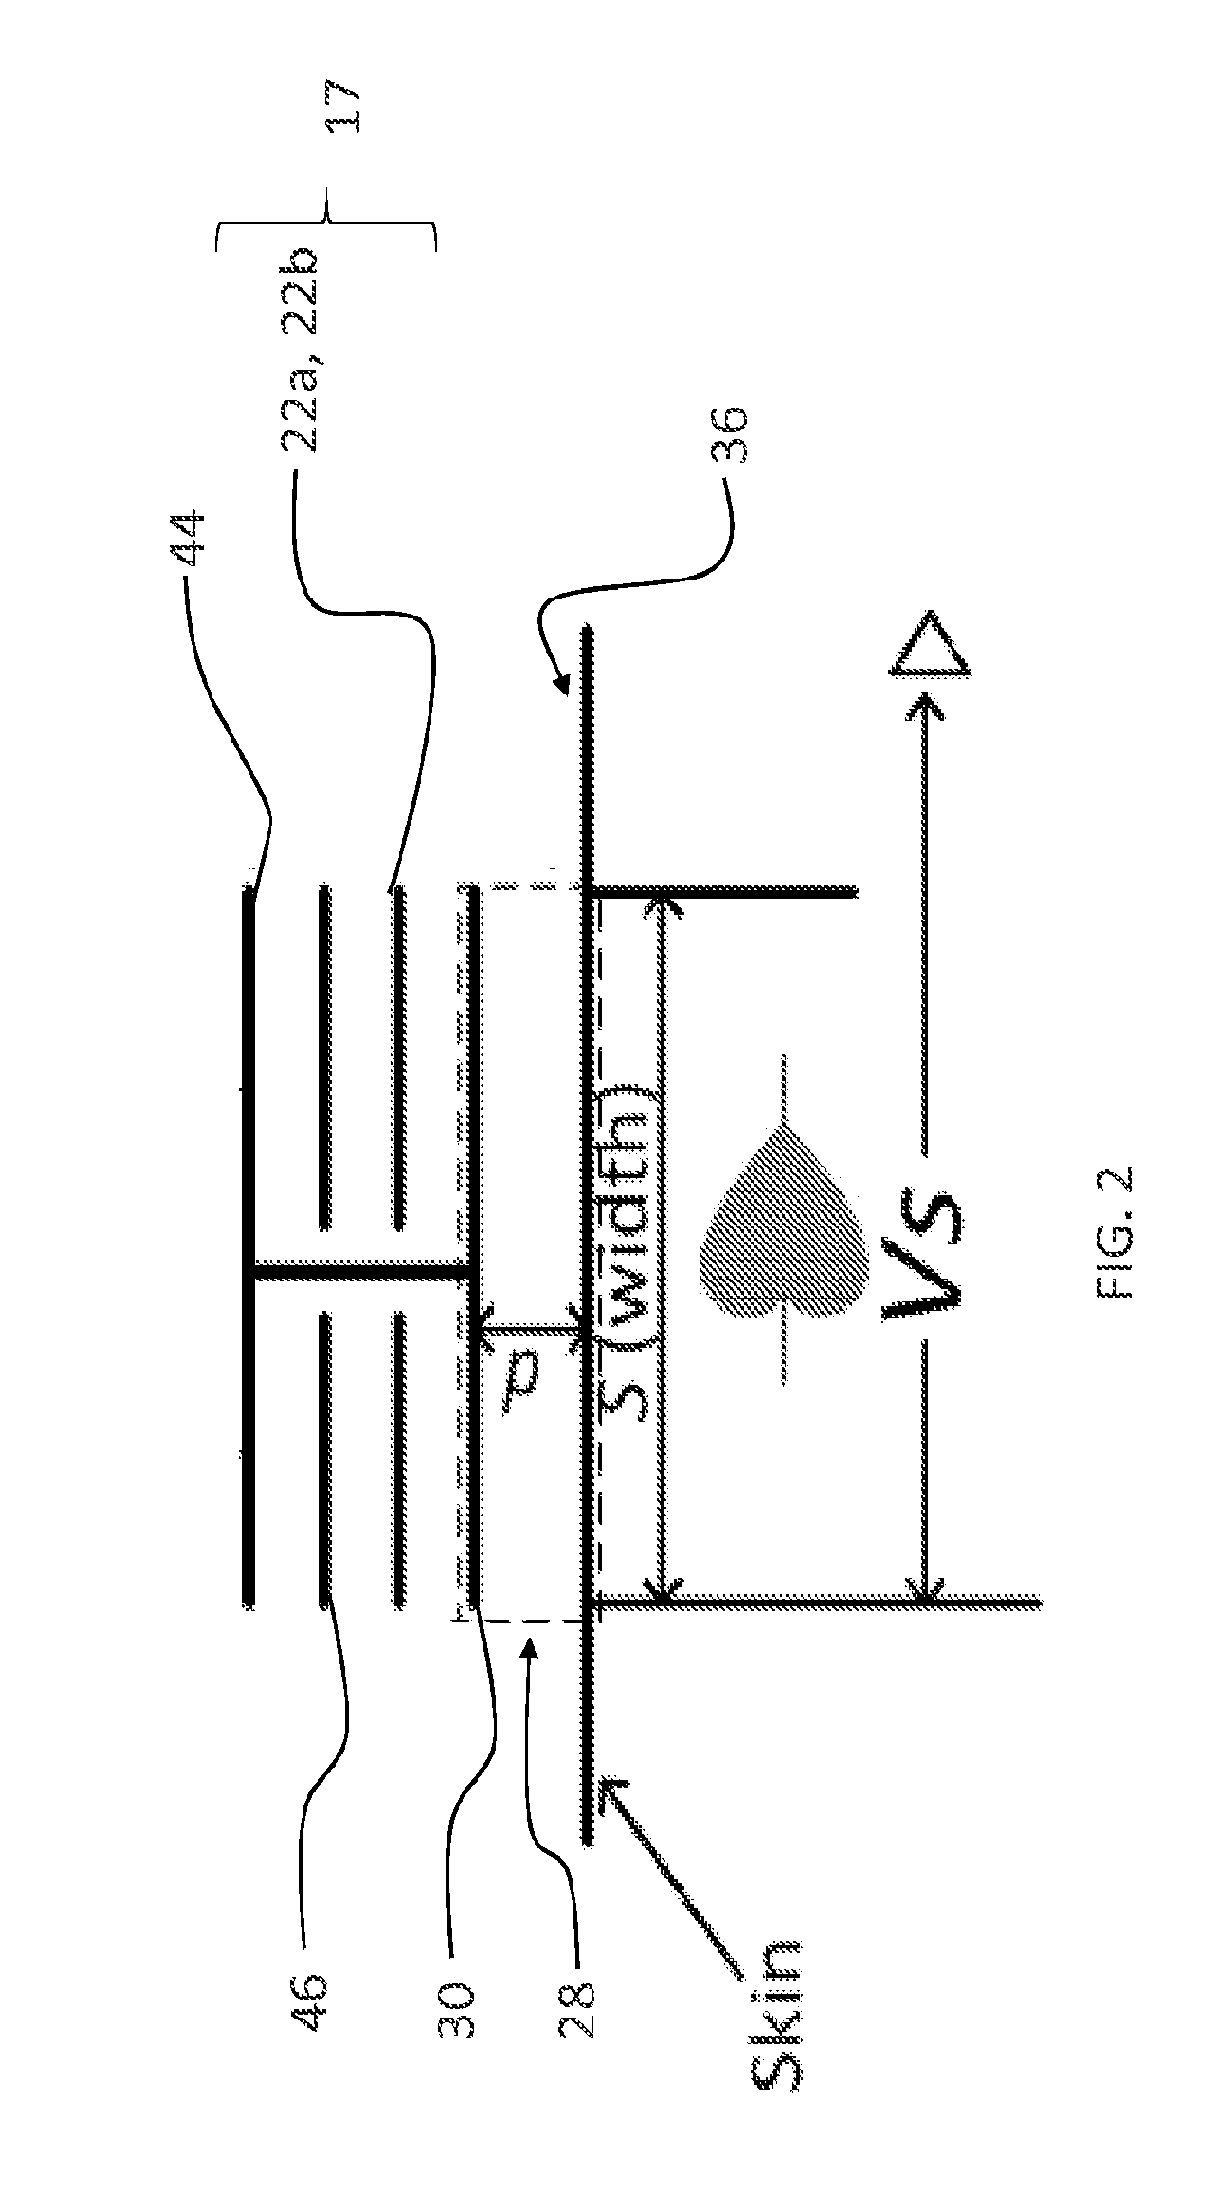 Electrical wearable capacitive biosensor and noise artifact suppression method